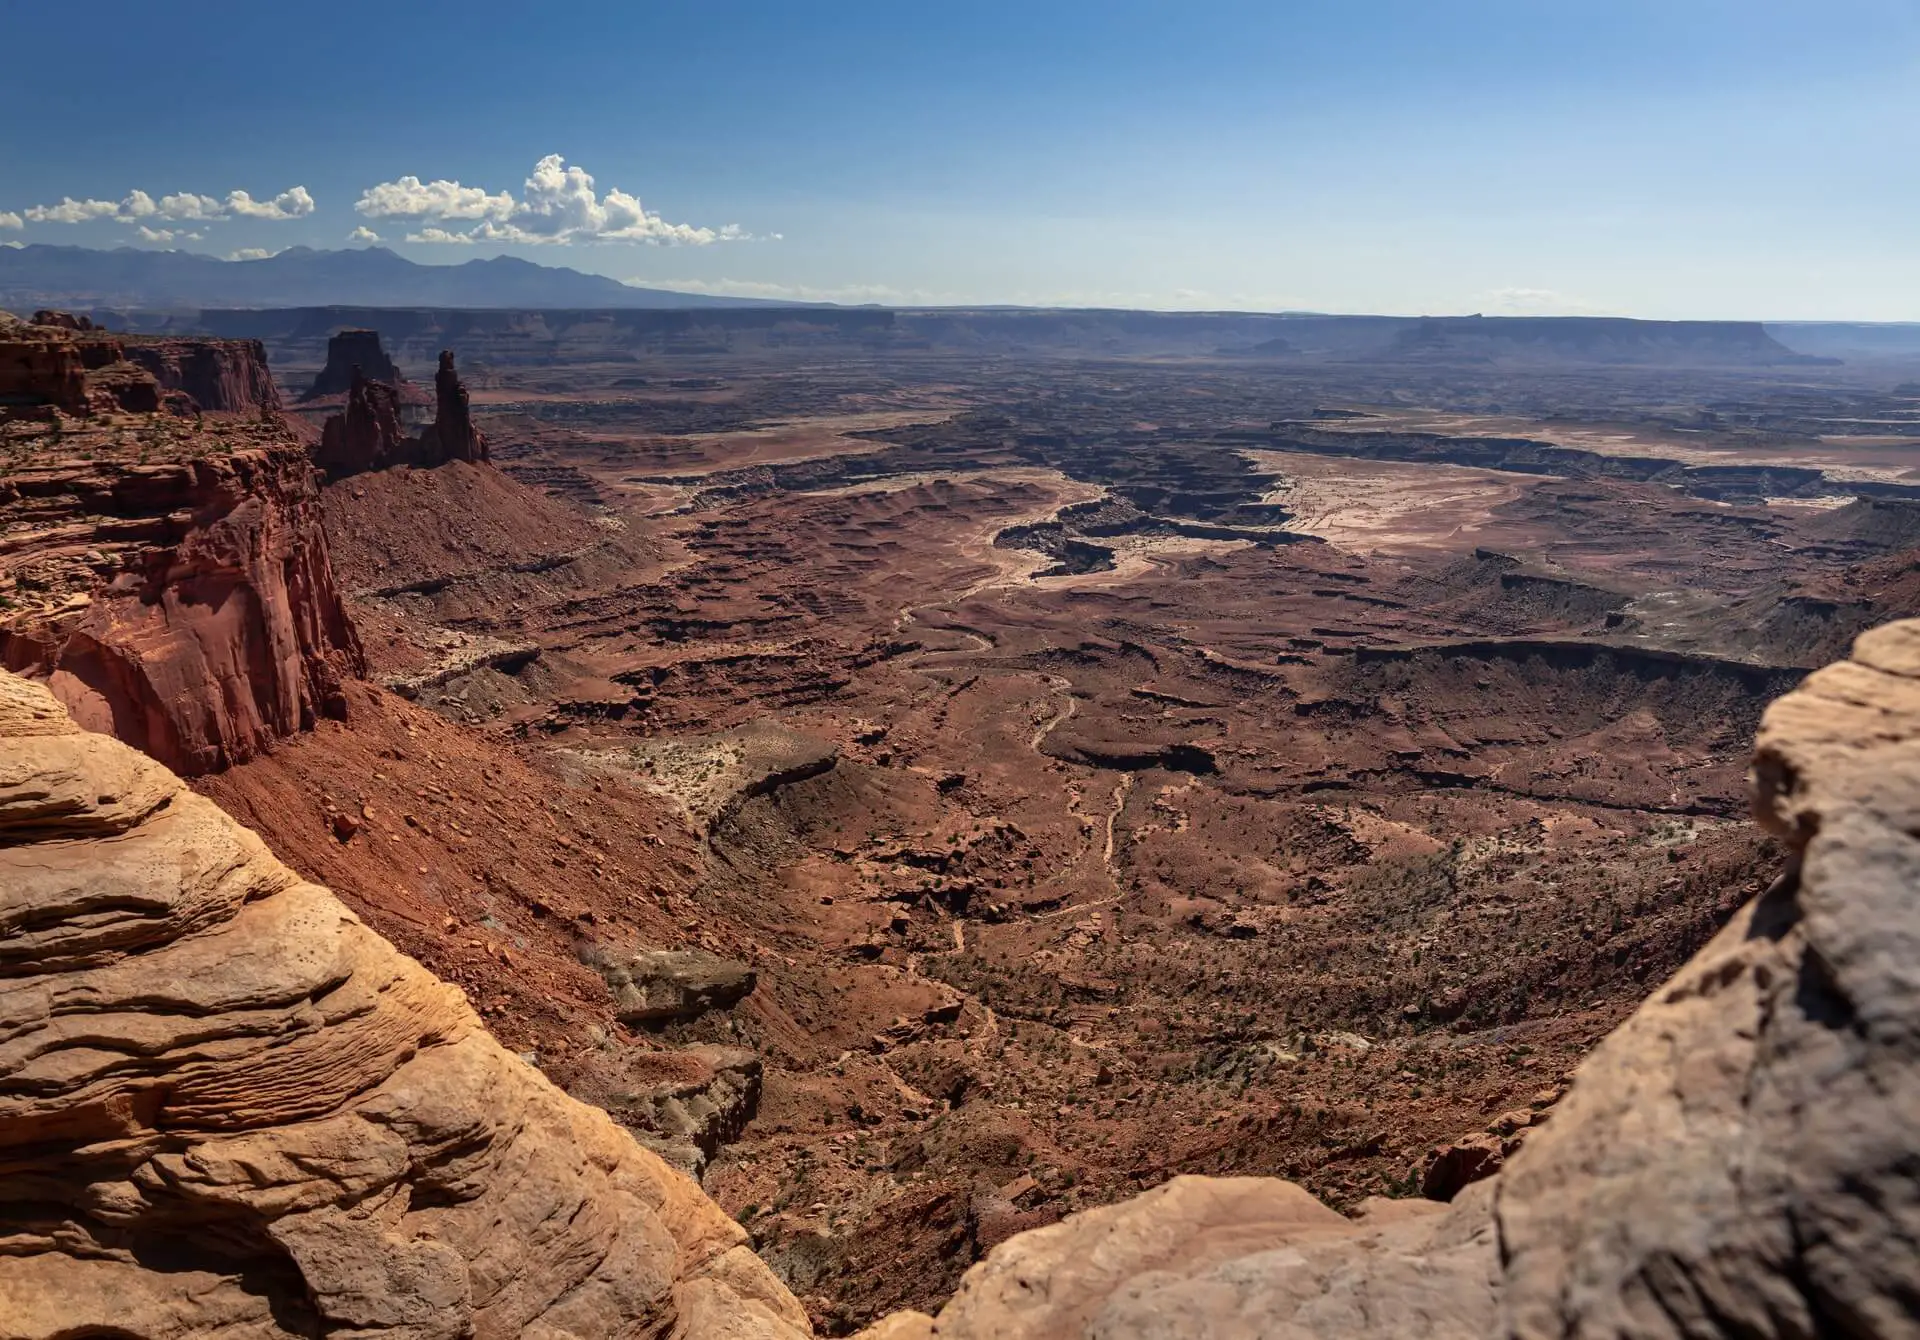 How much does it cost to enter Canyonlands National Park?